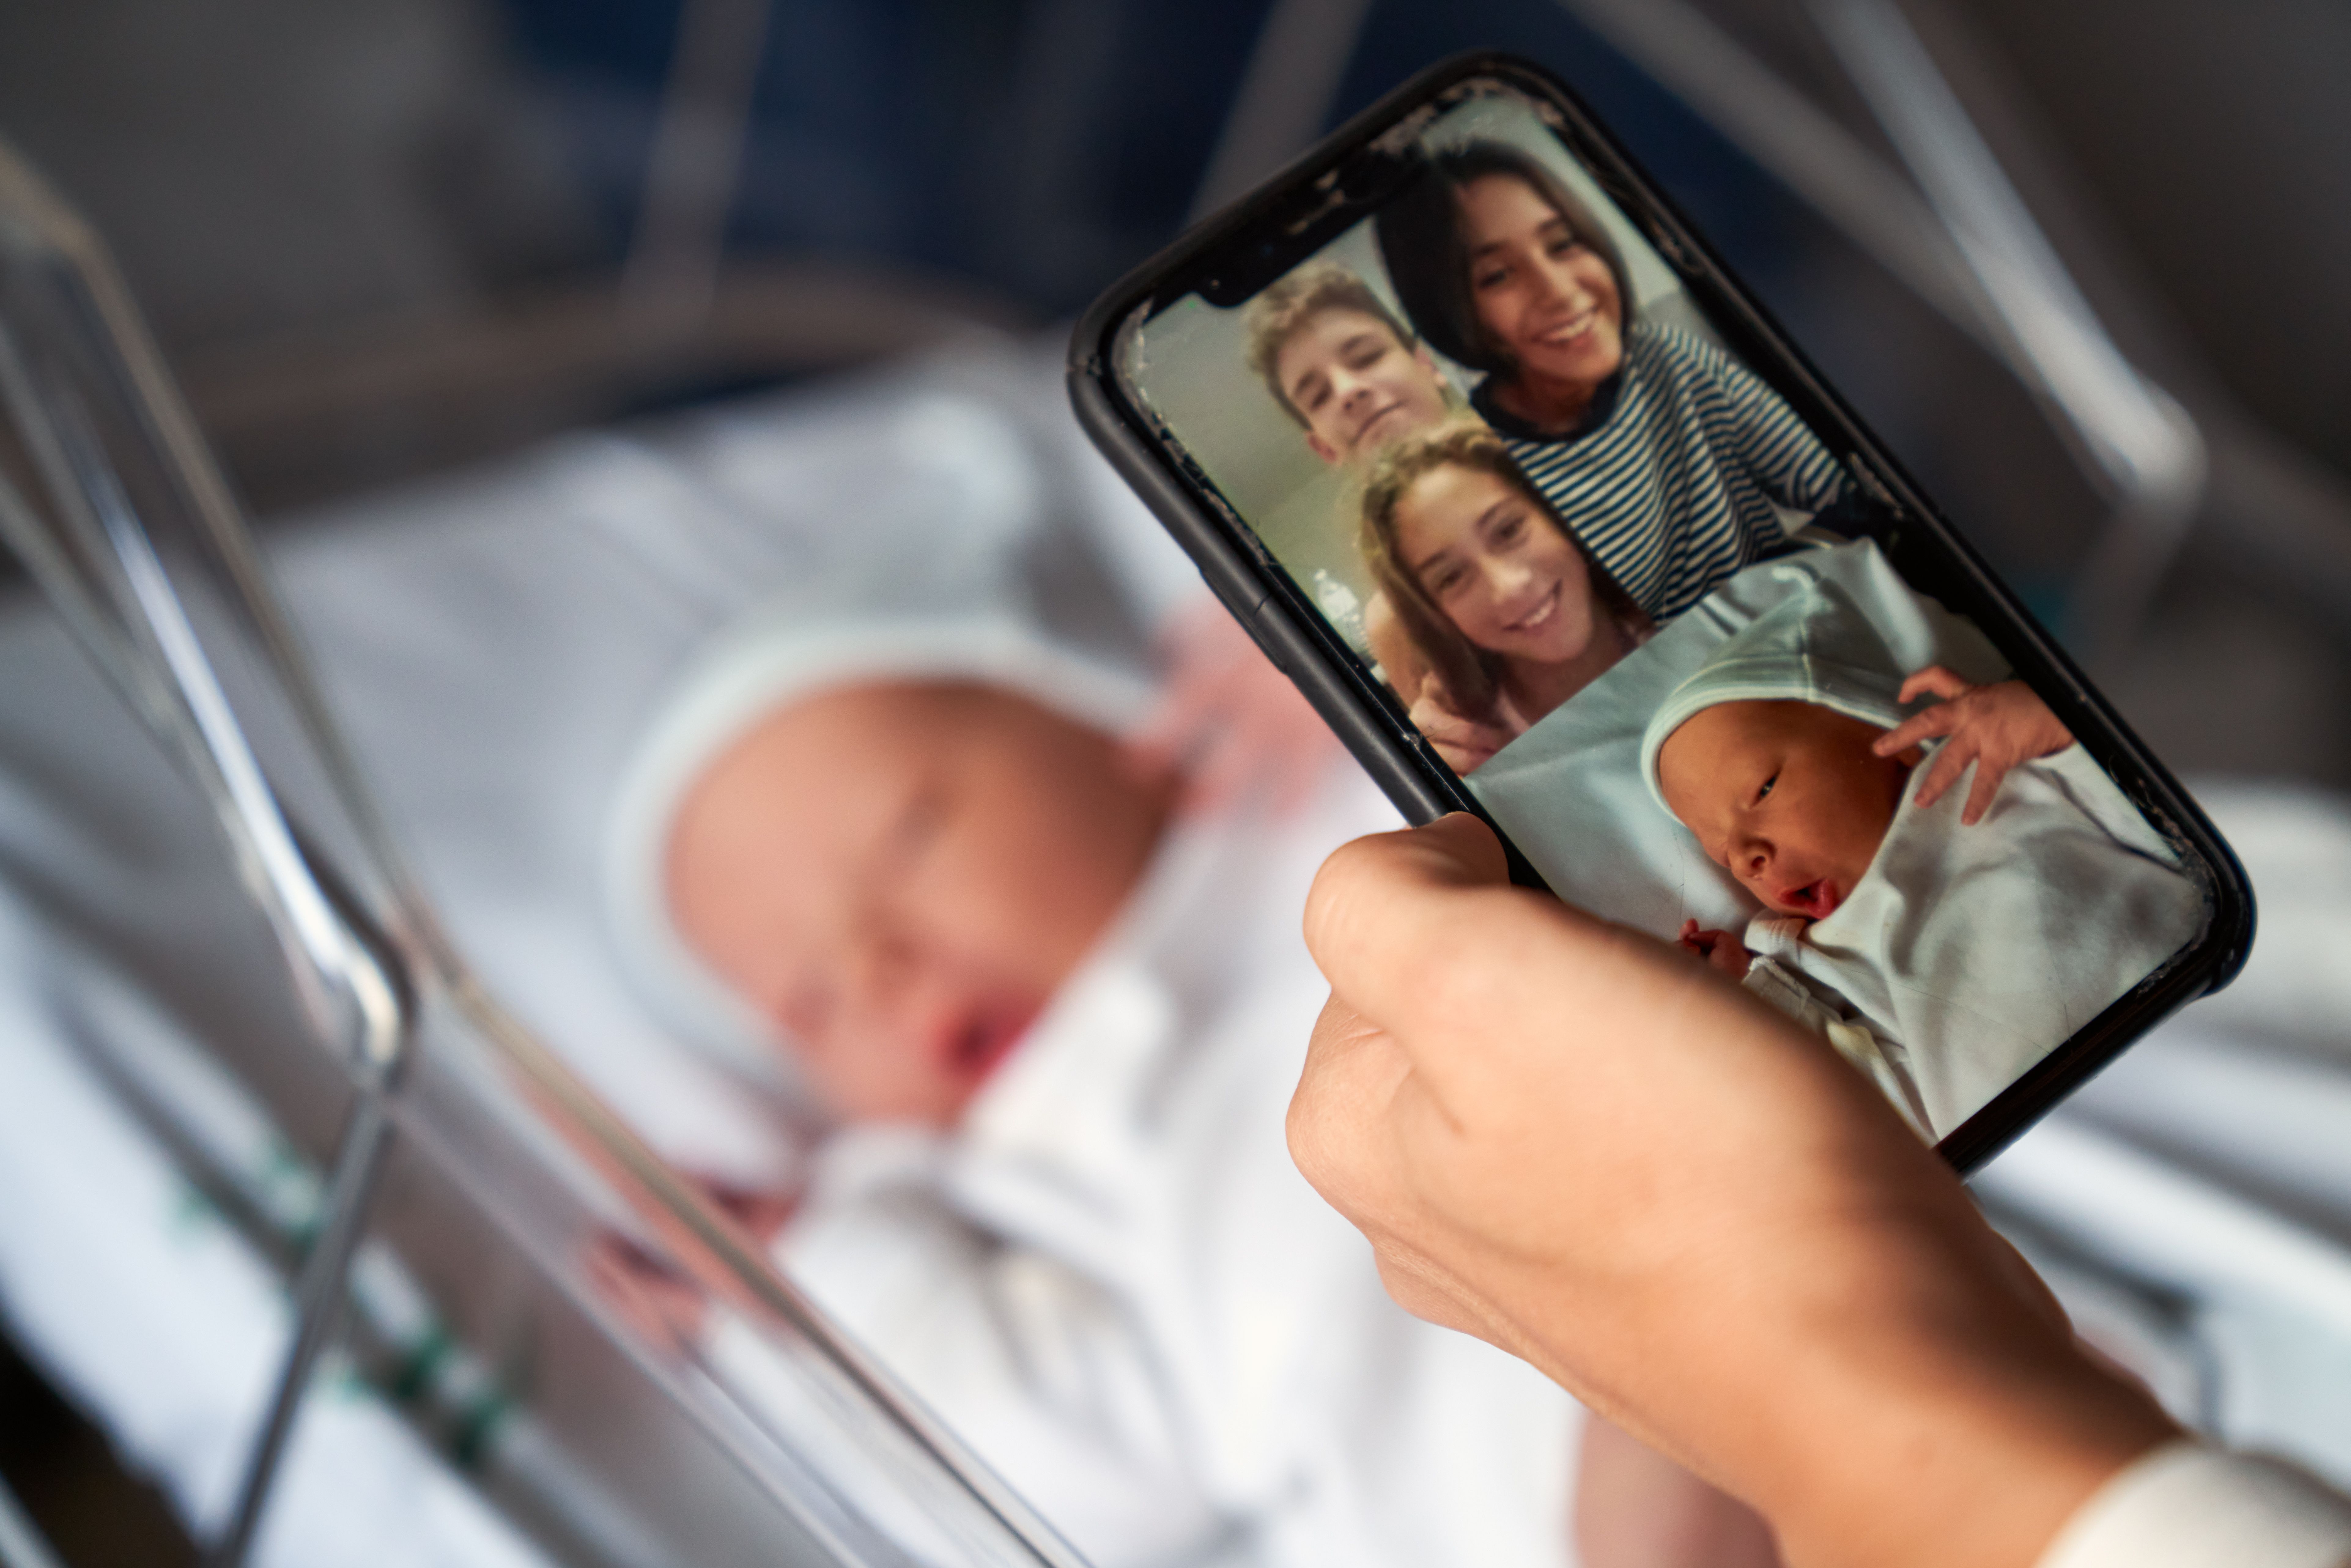 A newborn child on video call. | Source: Getty Images